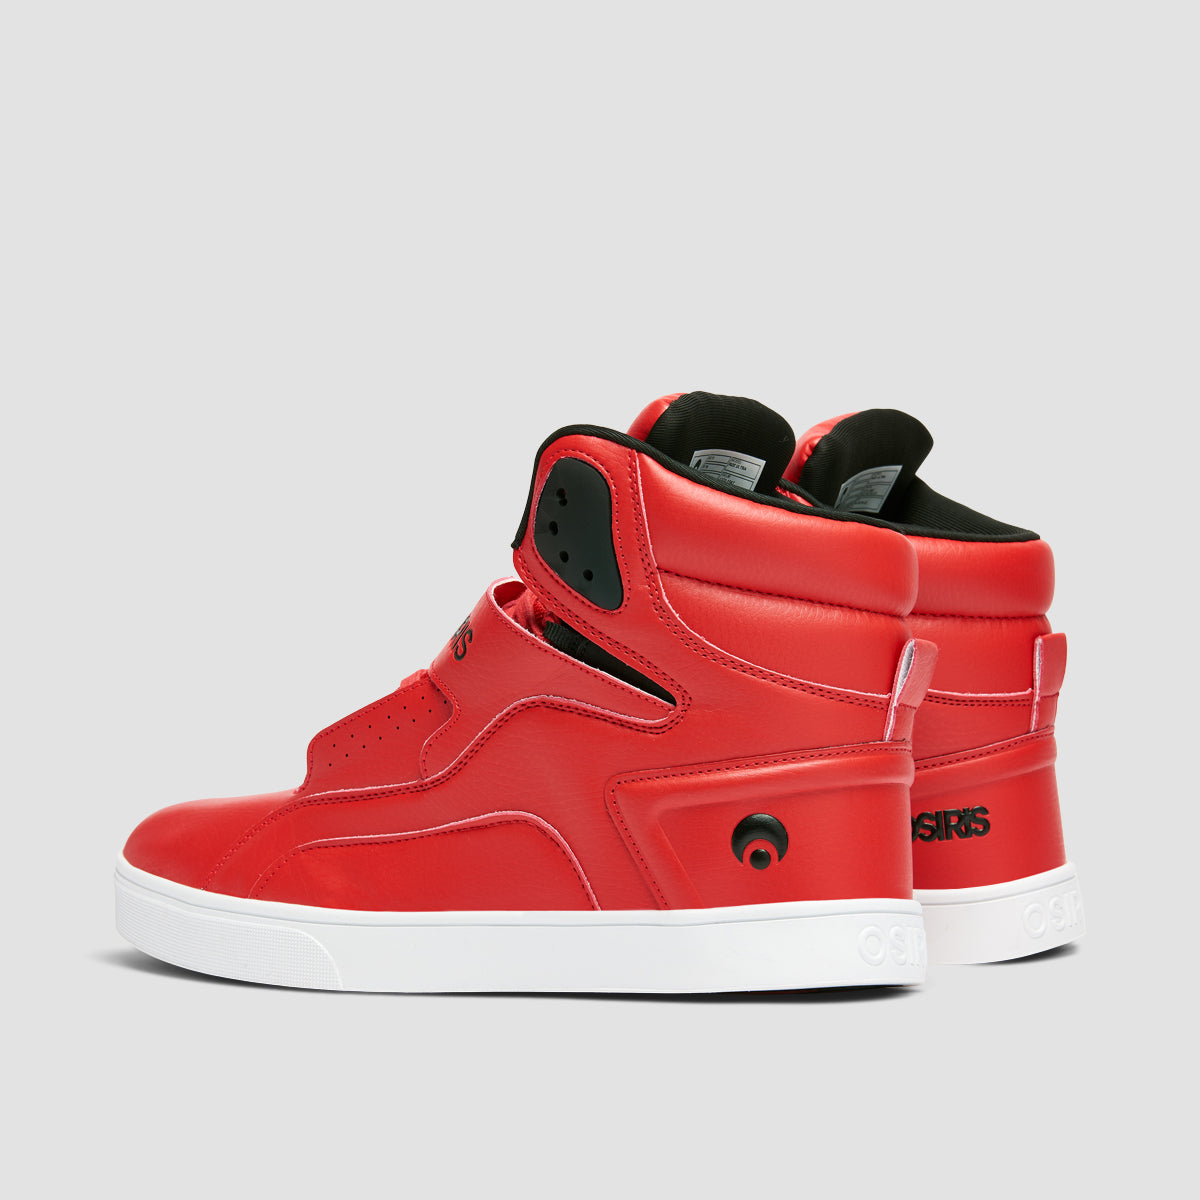 Osiris Rize Ultra High Top Shoes - Red/Red/Black